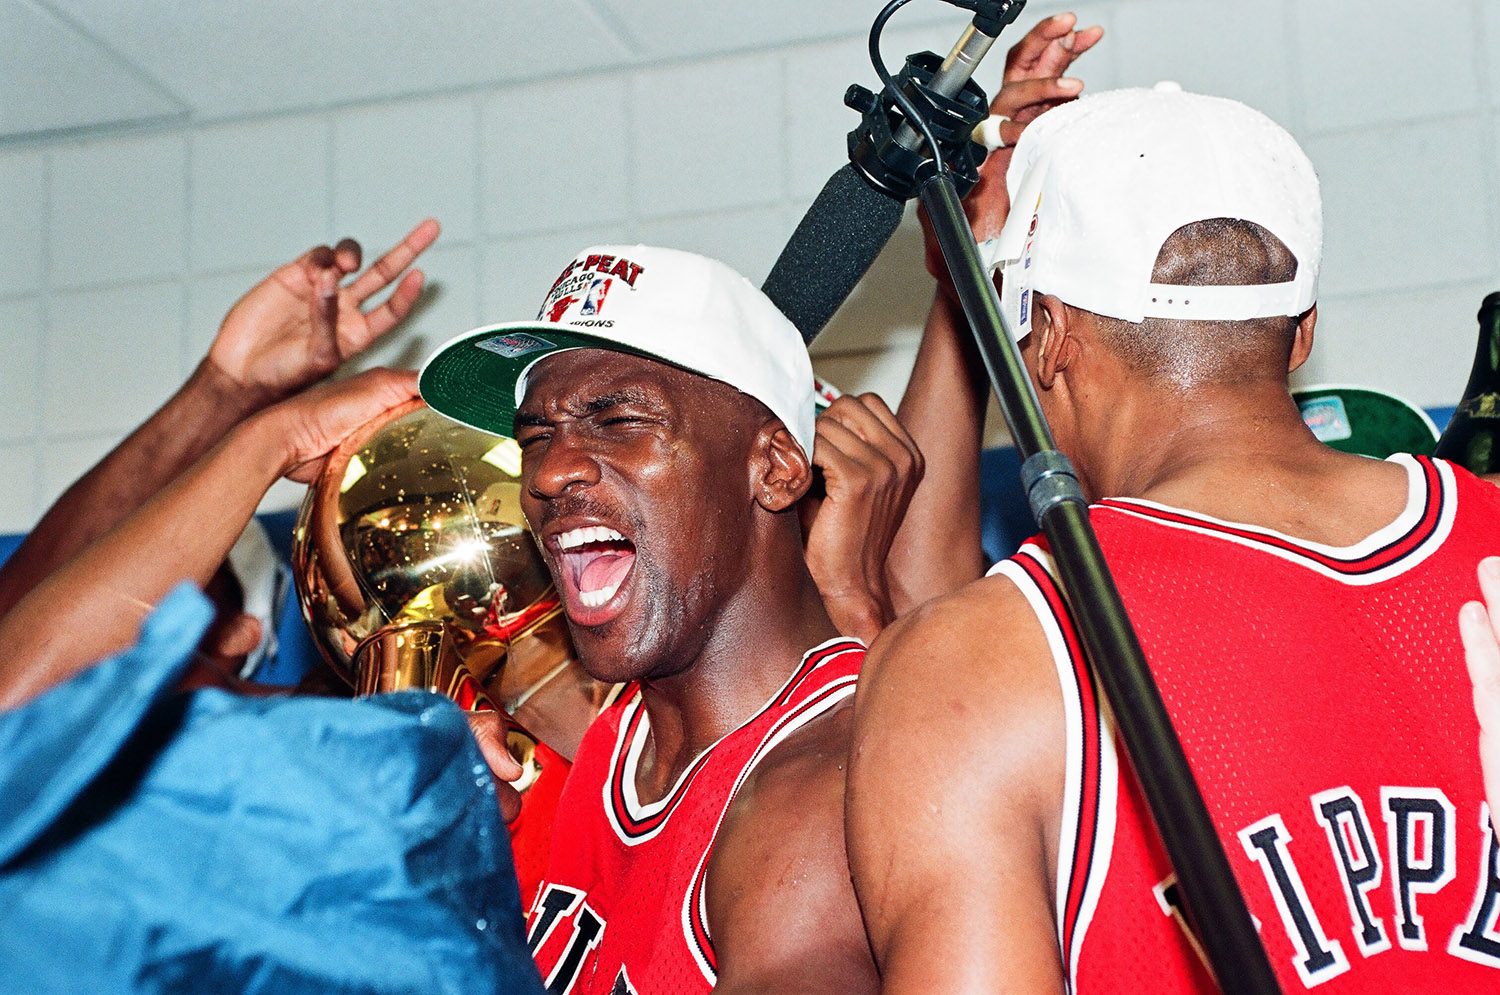 Color photo close up in the locker room of Michael Jordan looking gleefully with the championship trophy in the background and the back of Scottie Pippen visible in the foreground. Jordan is wearing a hat that says 